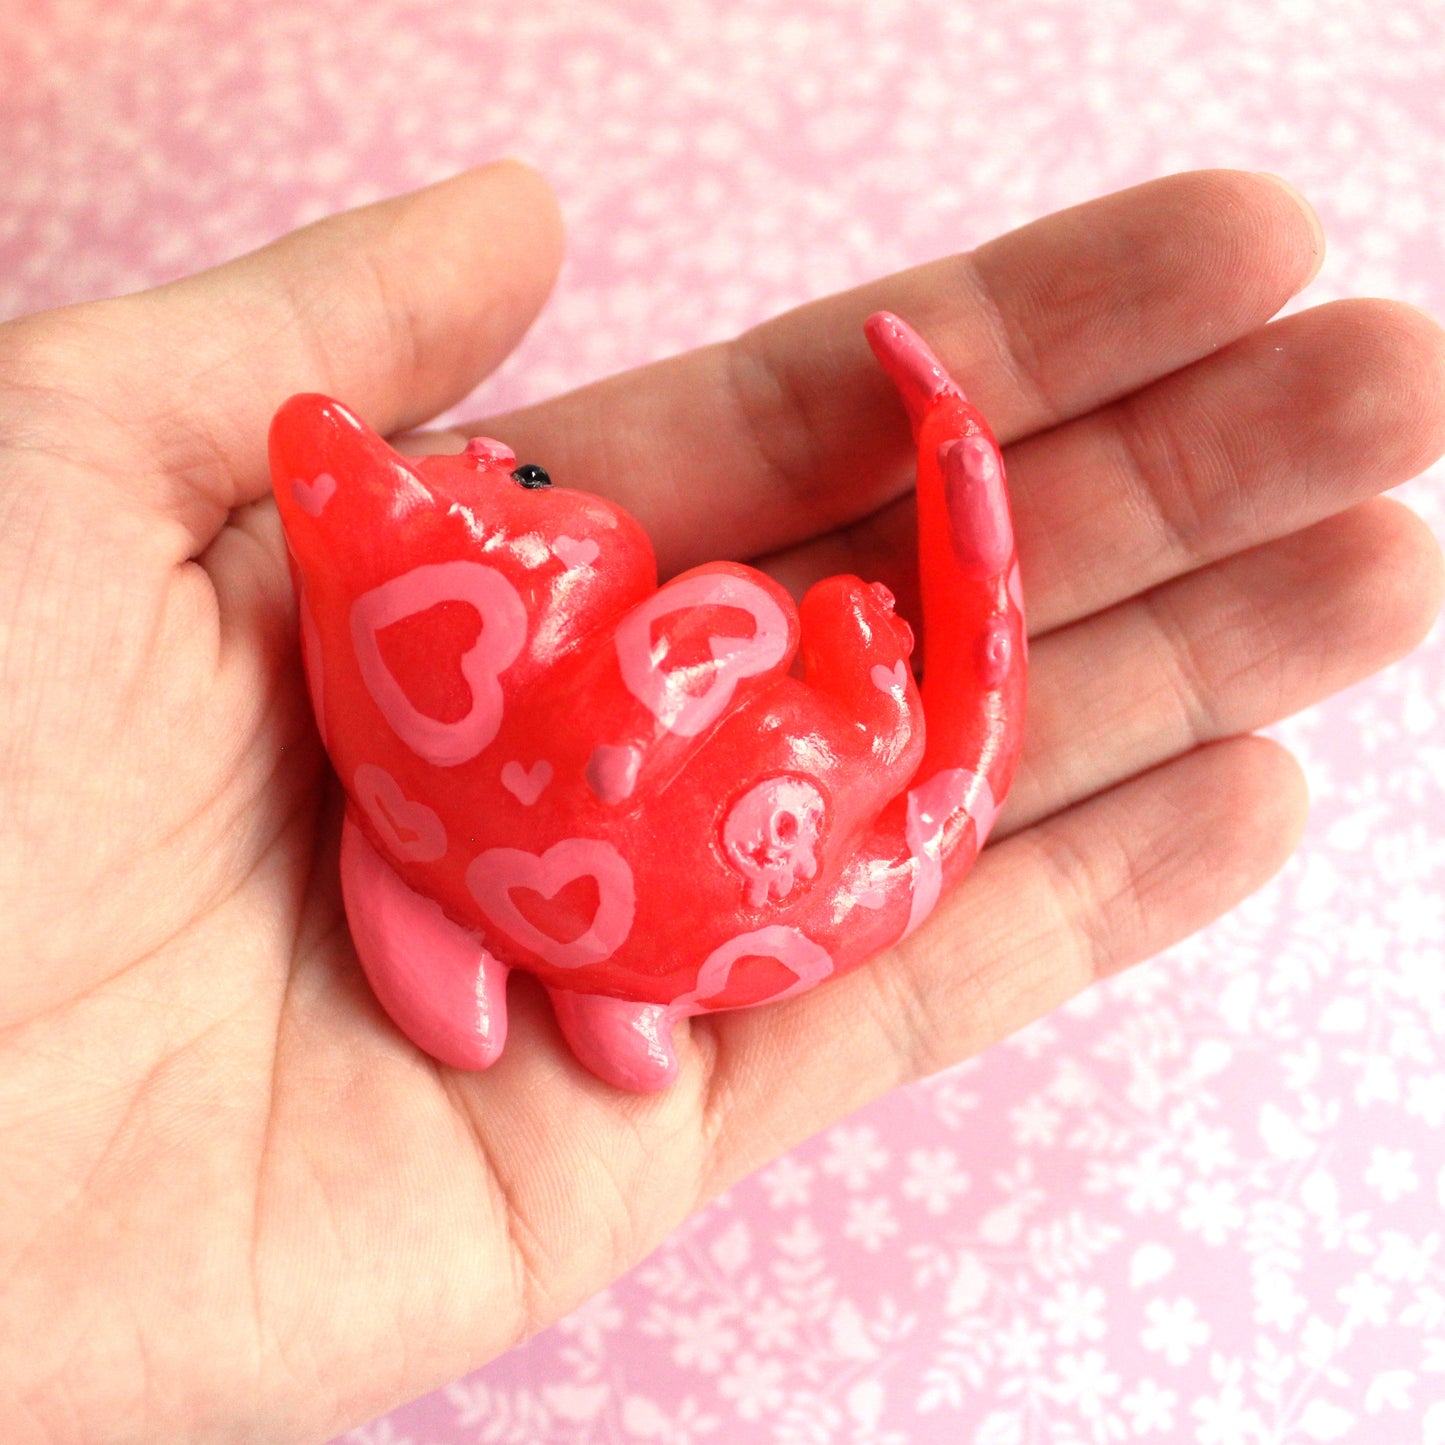 "Leopard Hearts" Cat Shark Figure. THERMAL COLOR CHANGE from Red to White. Handmade Resin Art Toy Mini Fig. Desk Decoration Collectable. Chibi